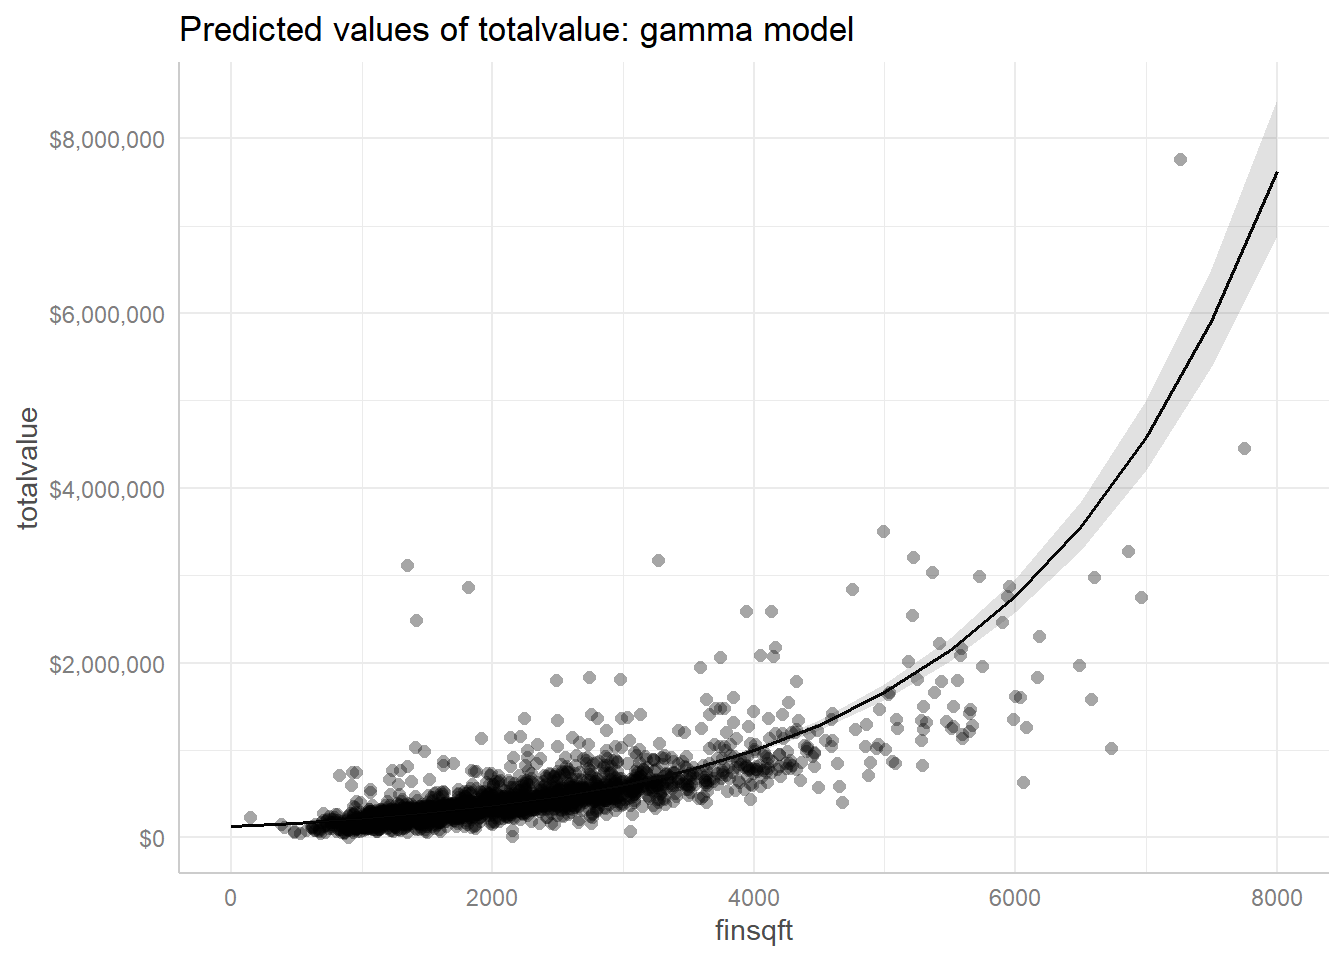 scatter plot of total values versus finished square feet with fitted gamma model